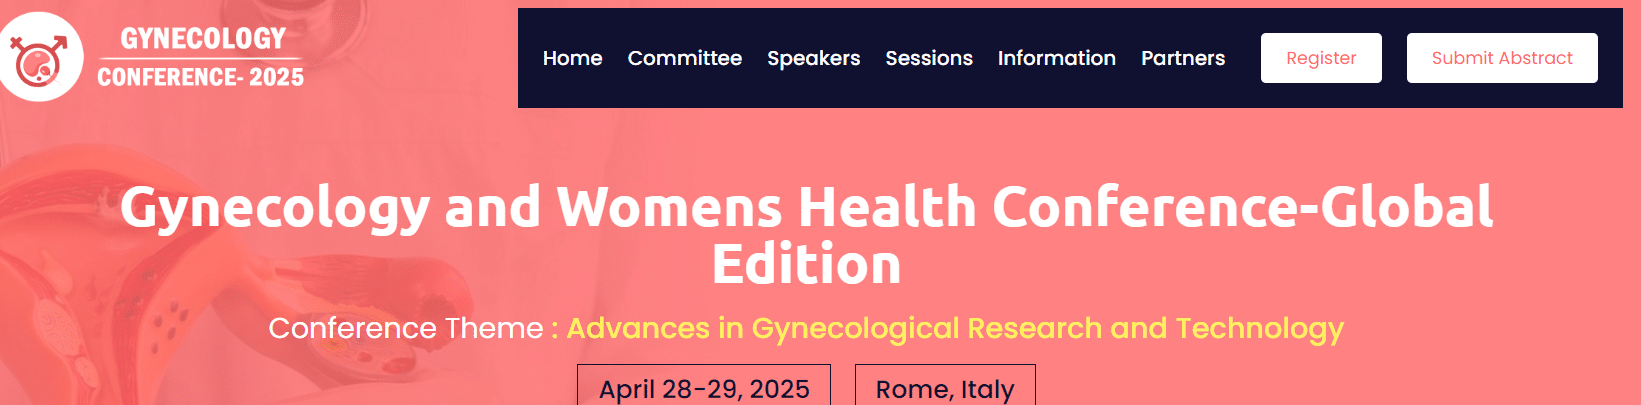 Gynecology and Womens Health Conference-Global Edition